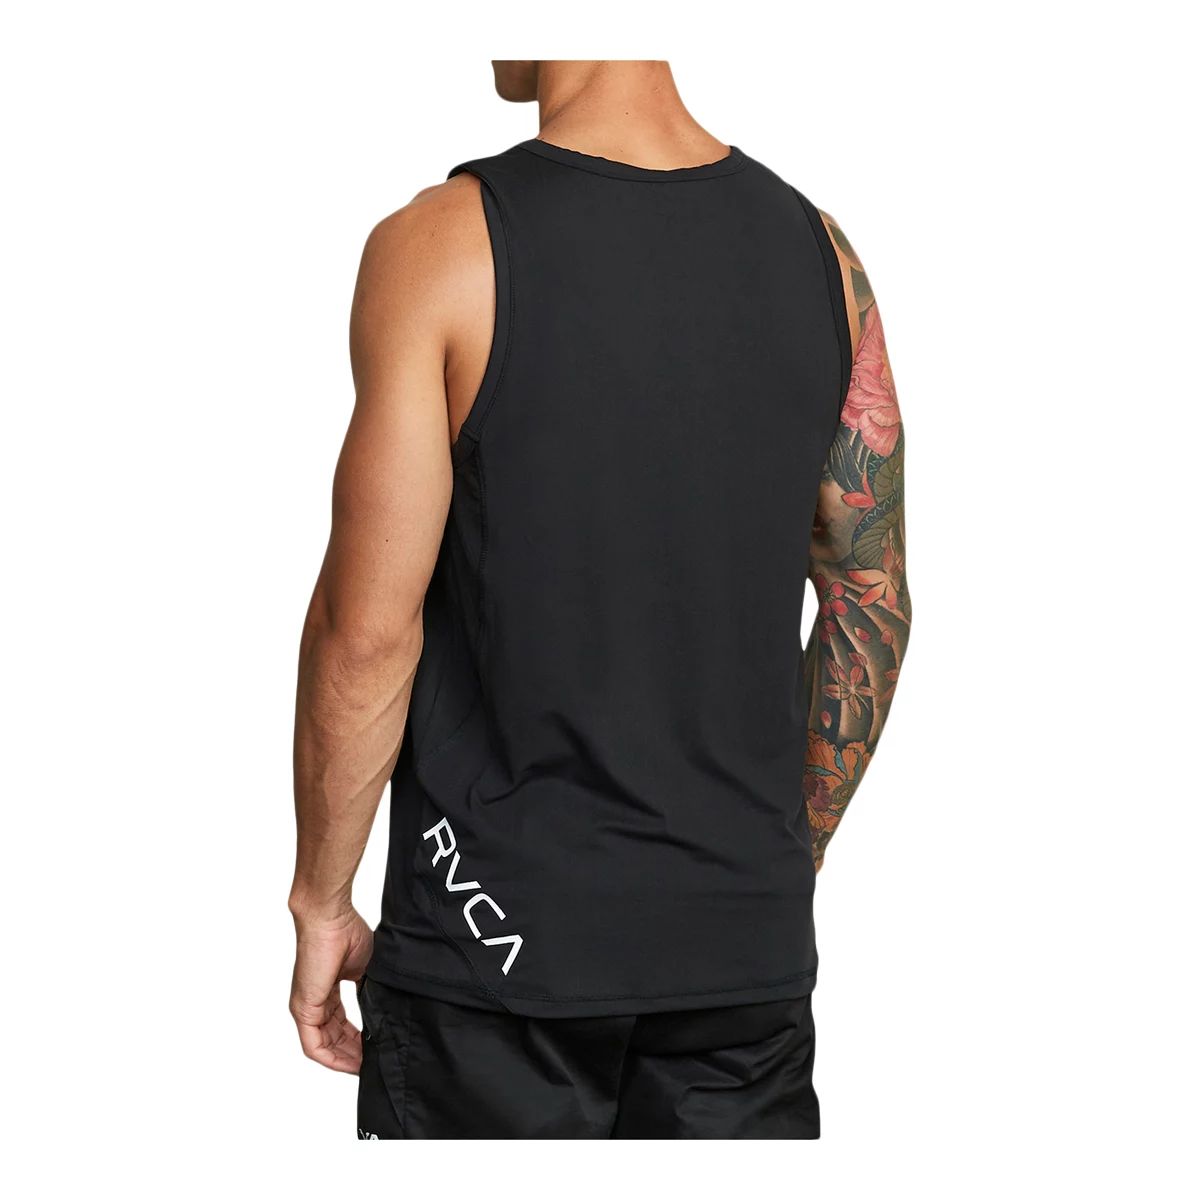 Womens Va Muscle Workout Tank Top by RVCA